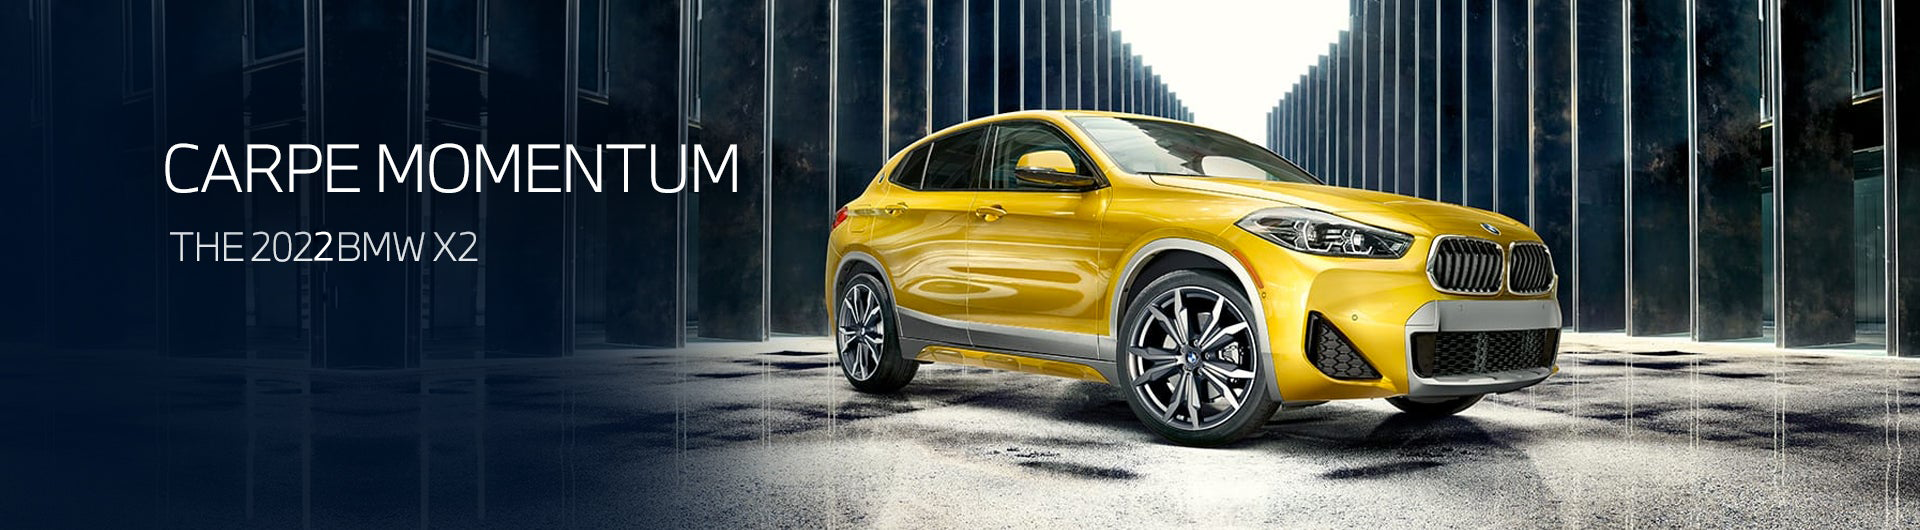 The New 2022 BMW X2 at BMW of Edison